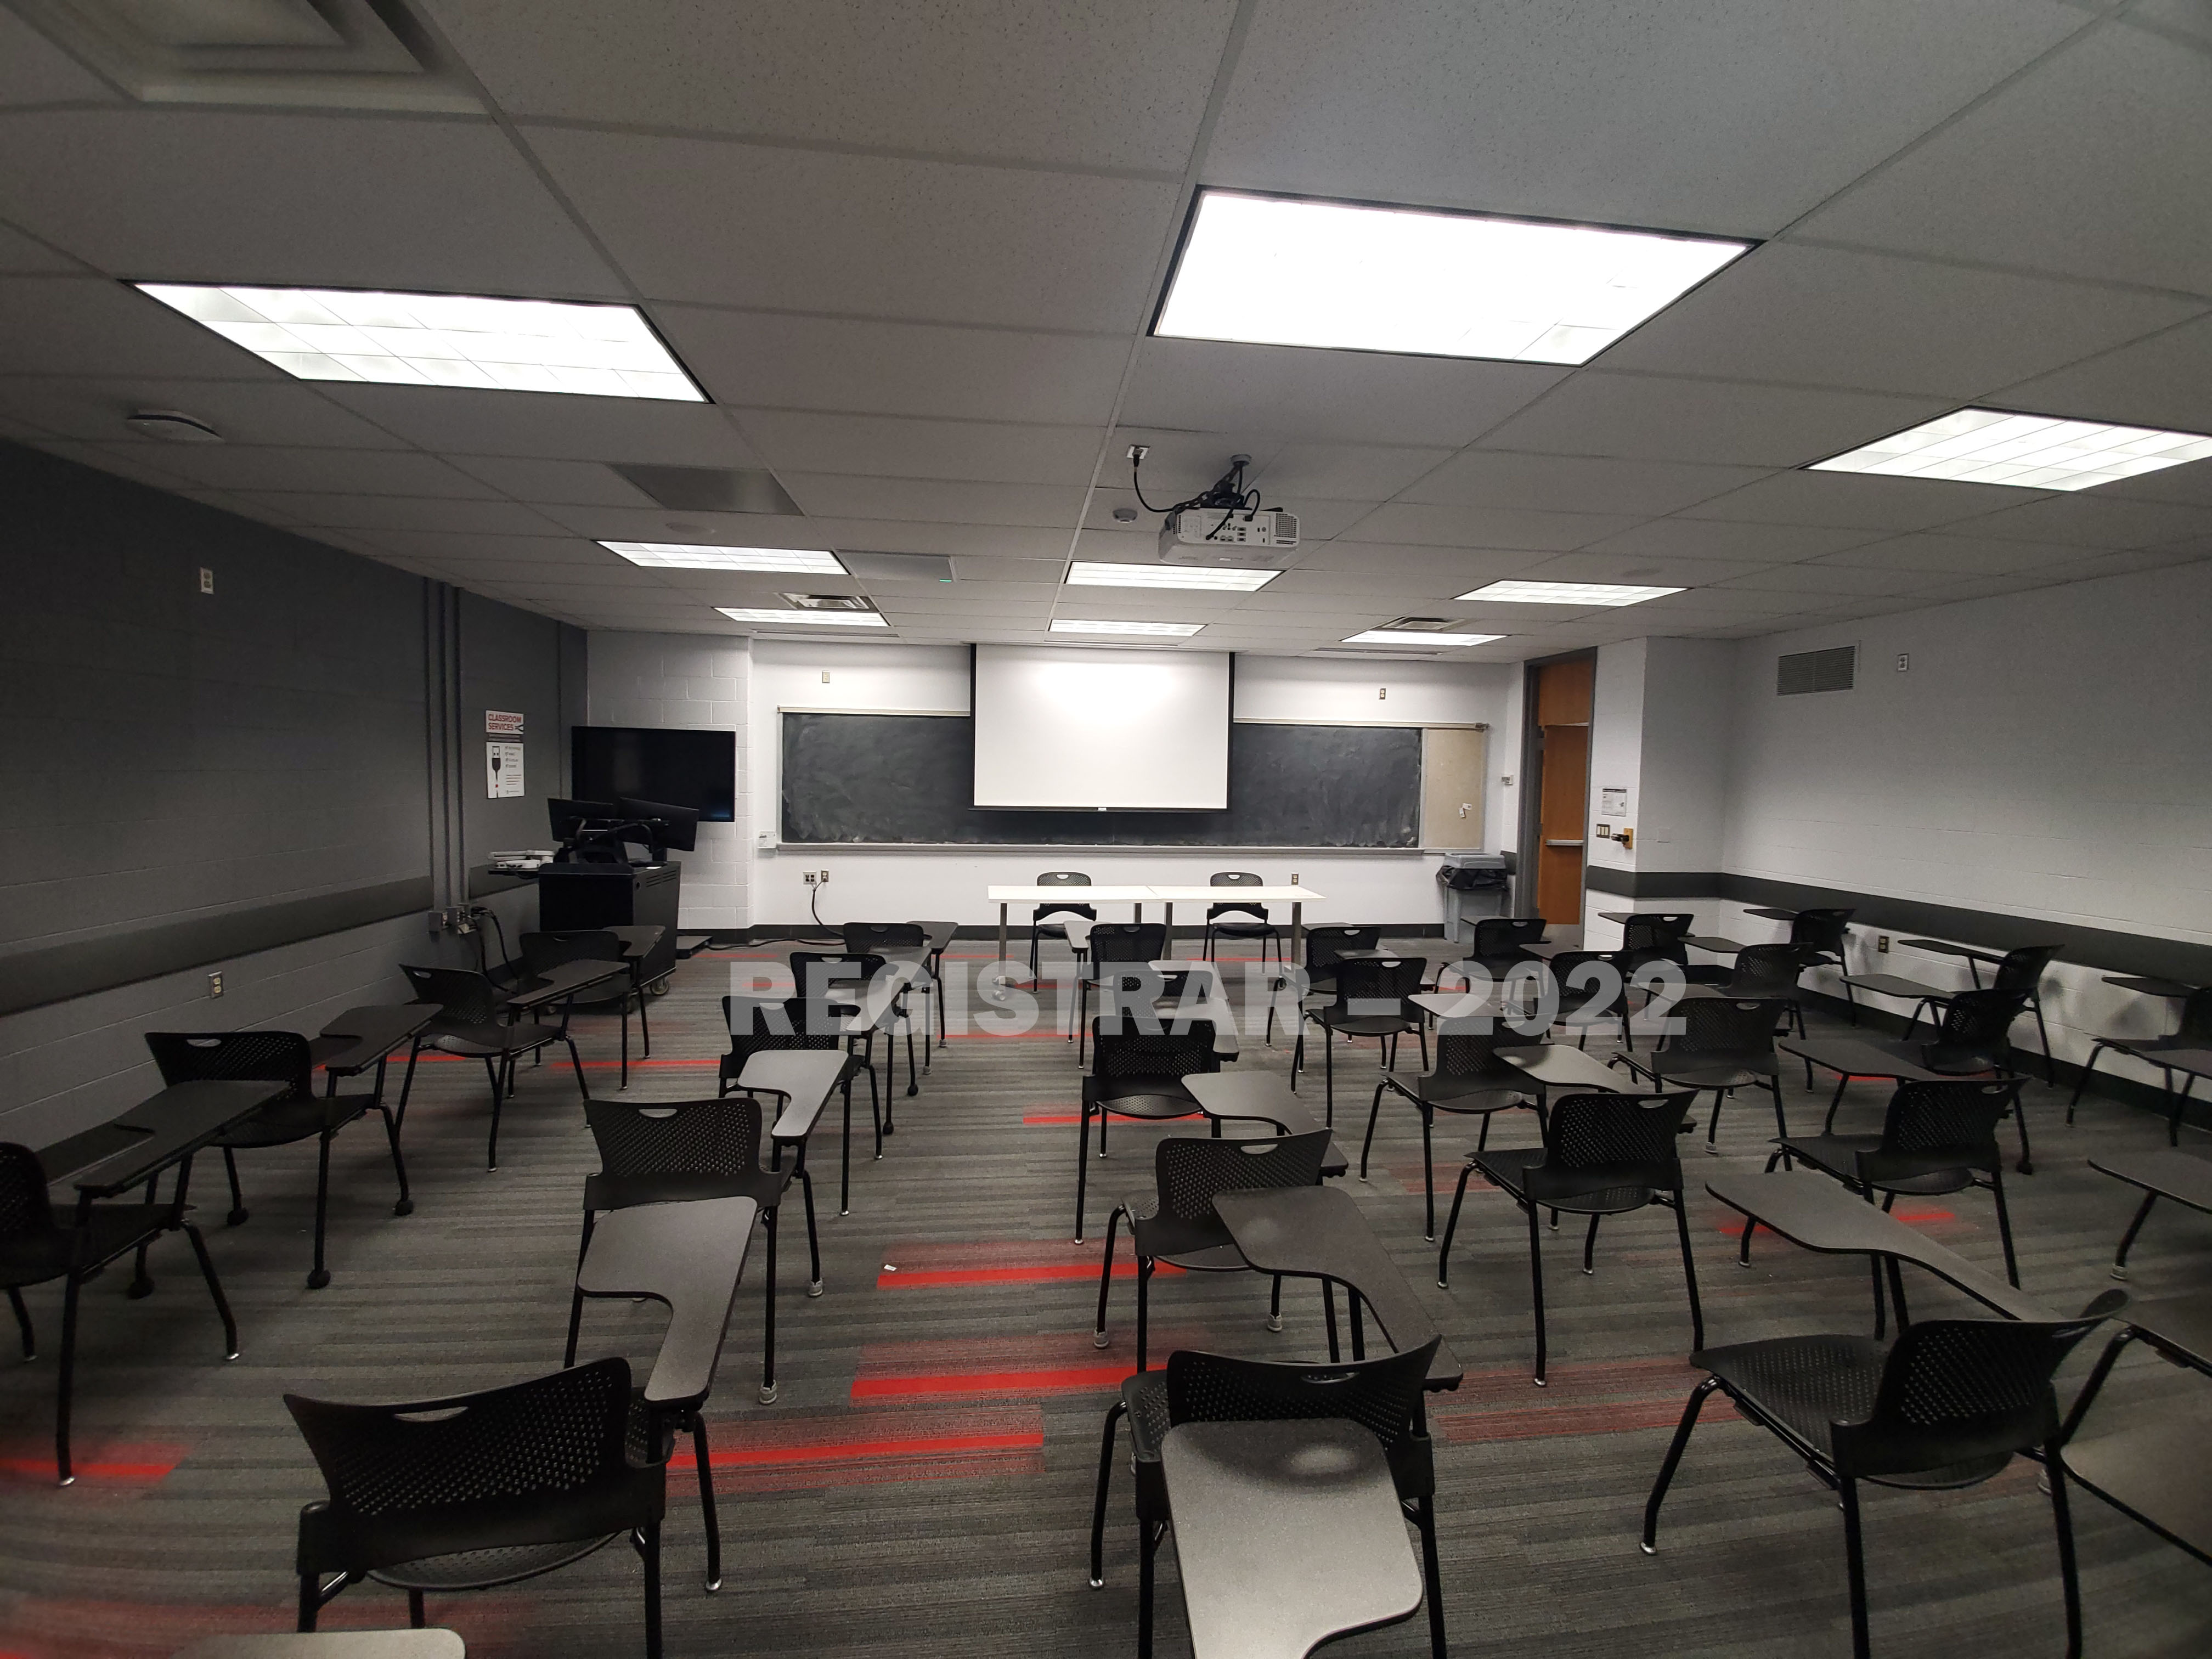 Baker Systems Engineering room 180 ultra wide angle view from the back of the room with projector screen down